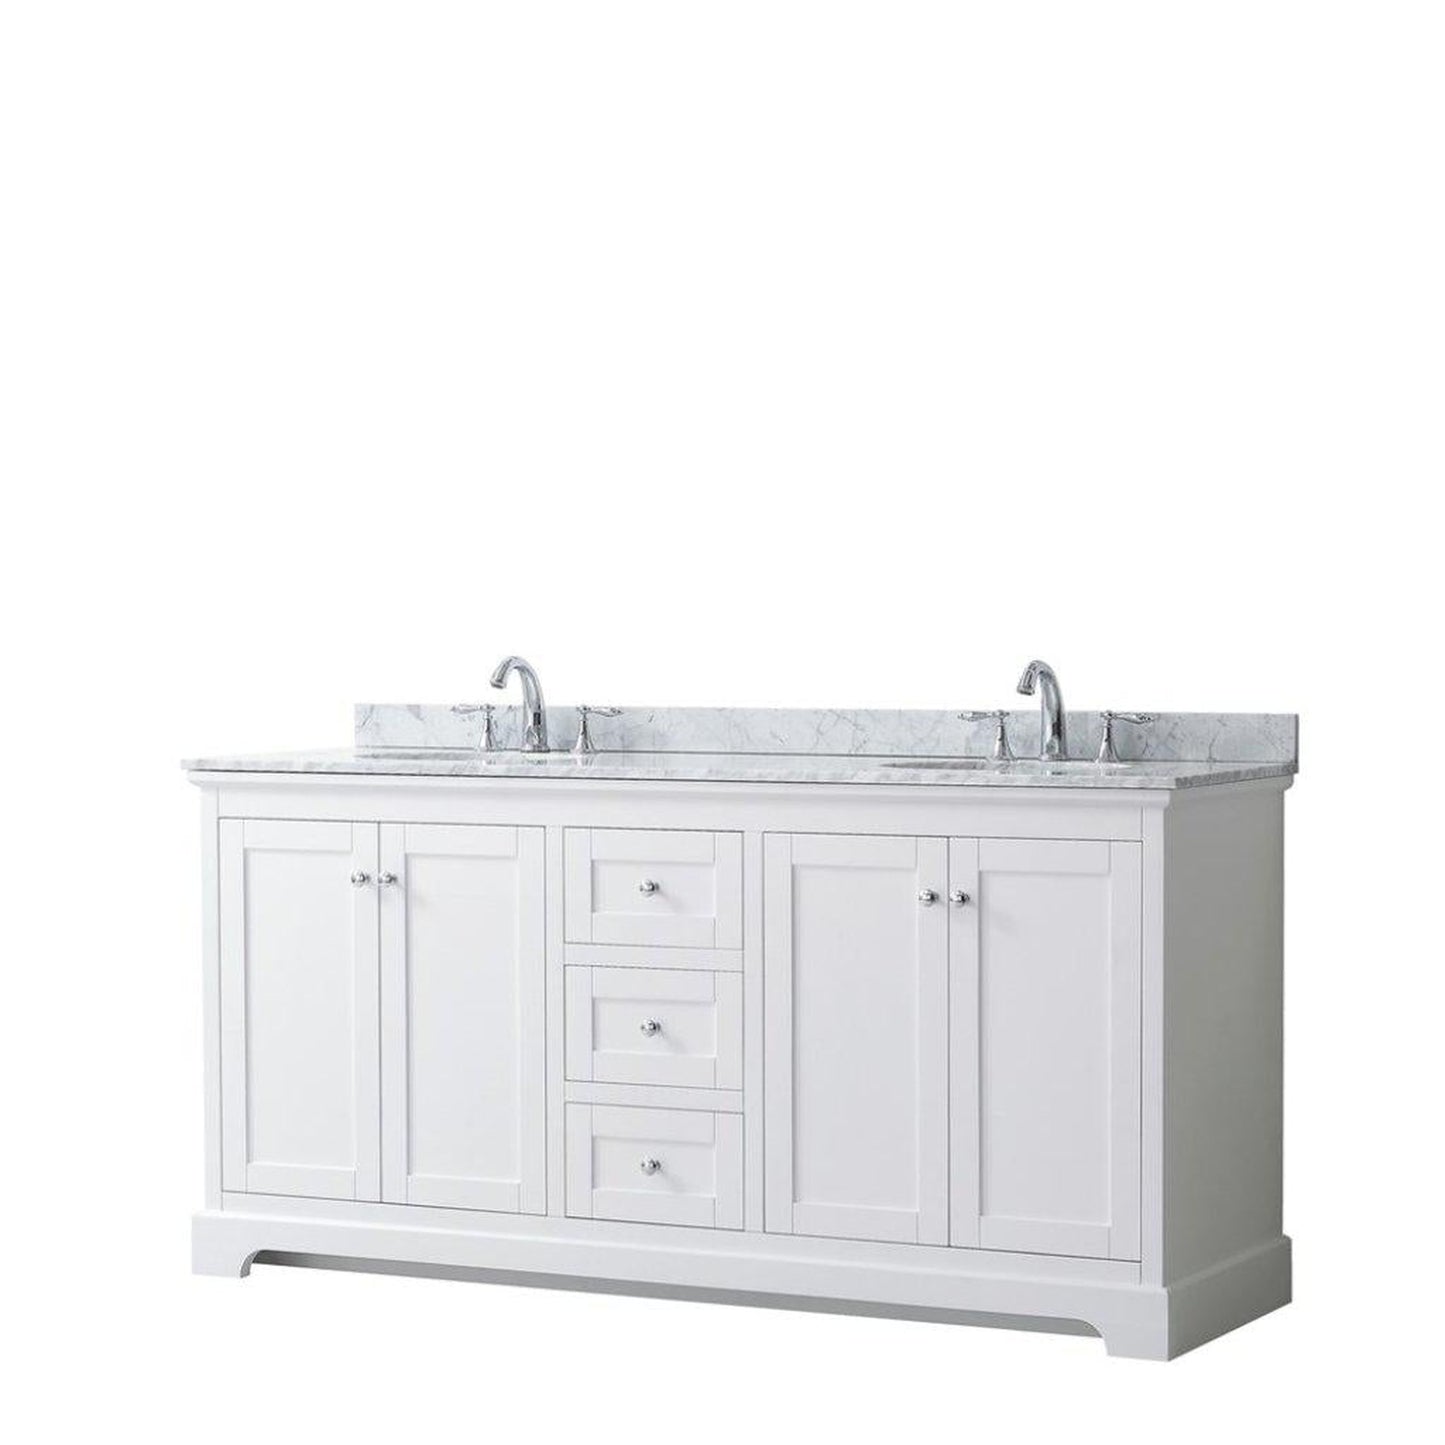 Wyndham Collection Avery 72" White Double Bathroom Vanity, White Carrara Marble Countertop With 3-Hole Faucet, 8" Oval Sink, Polished Chrome Trims